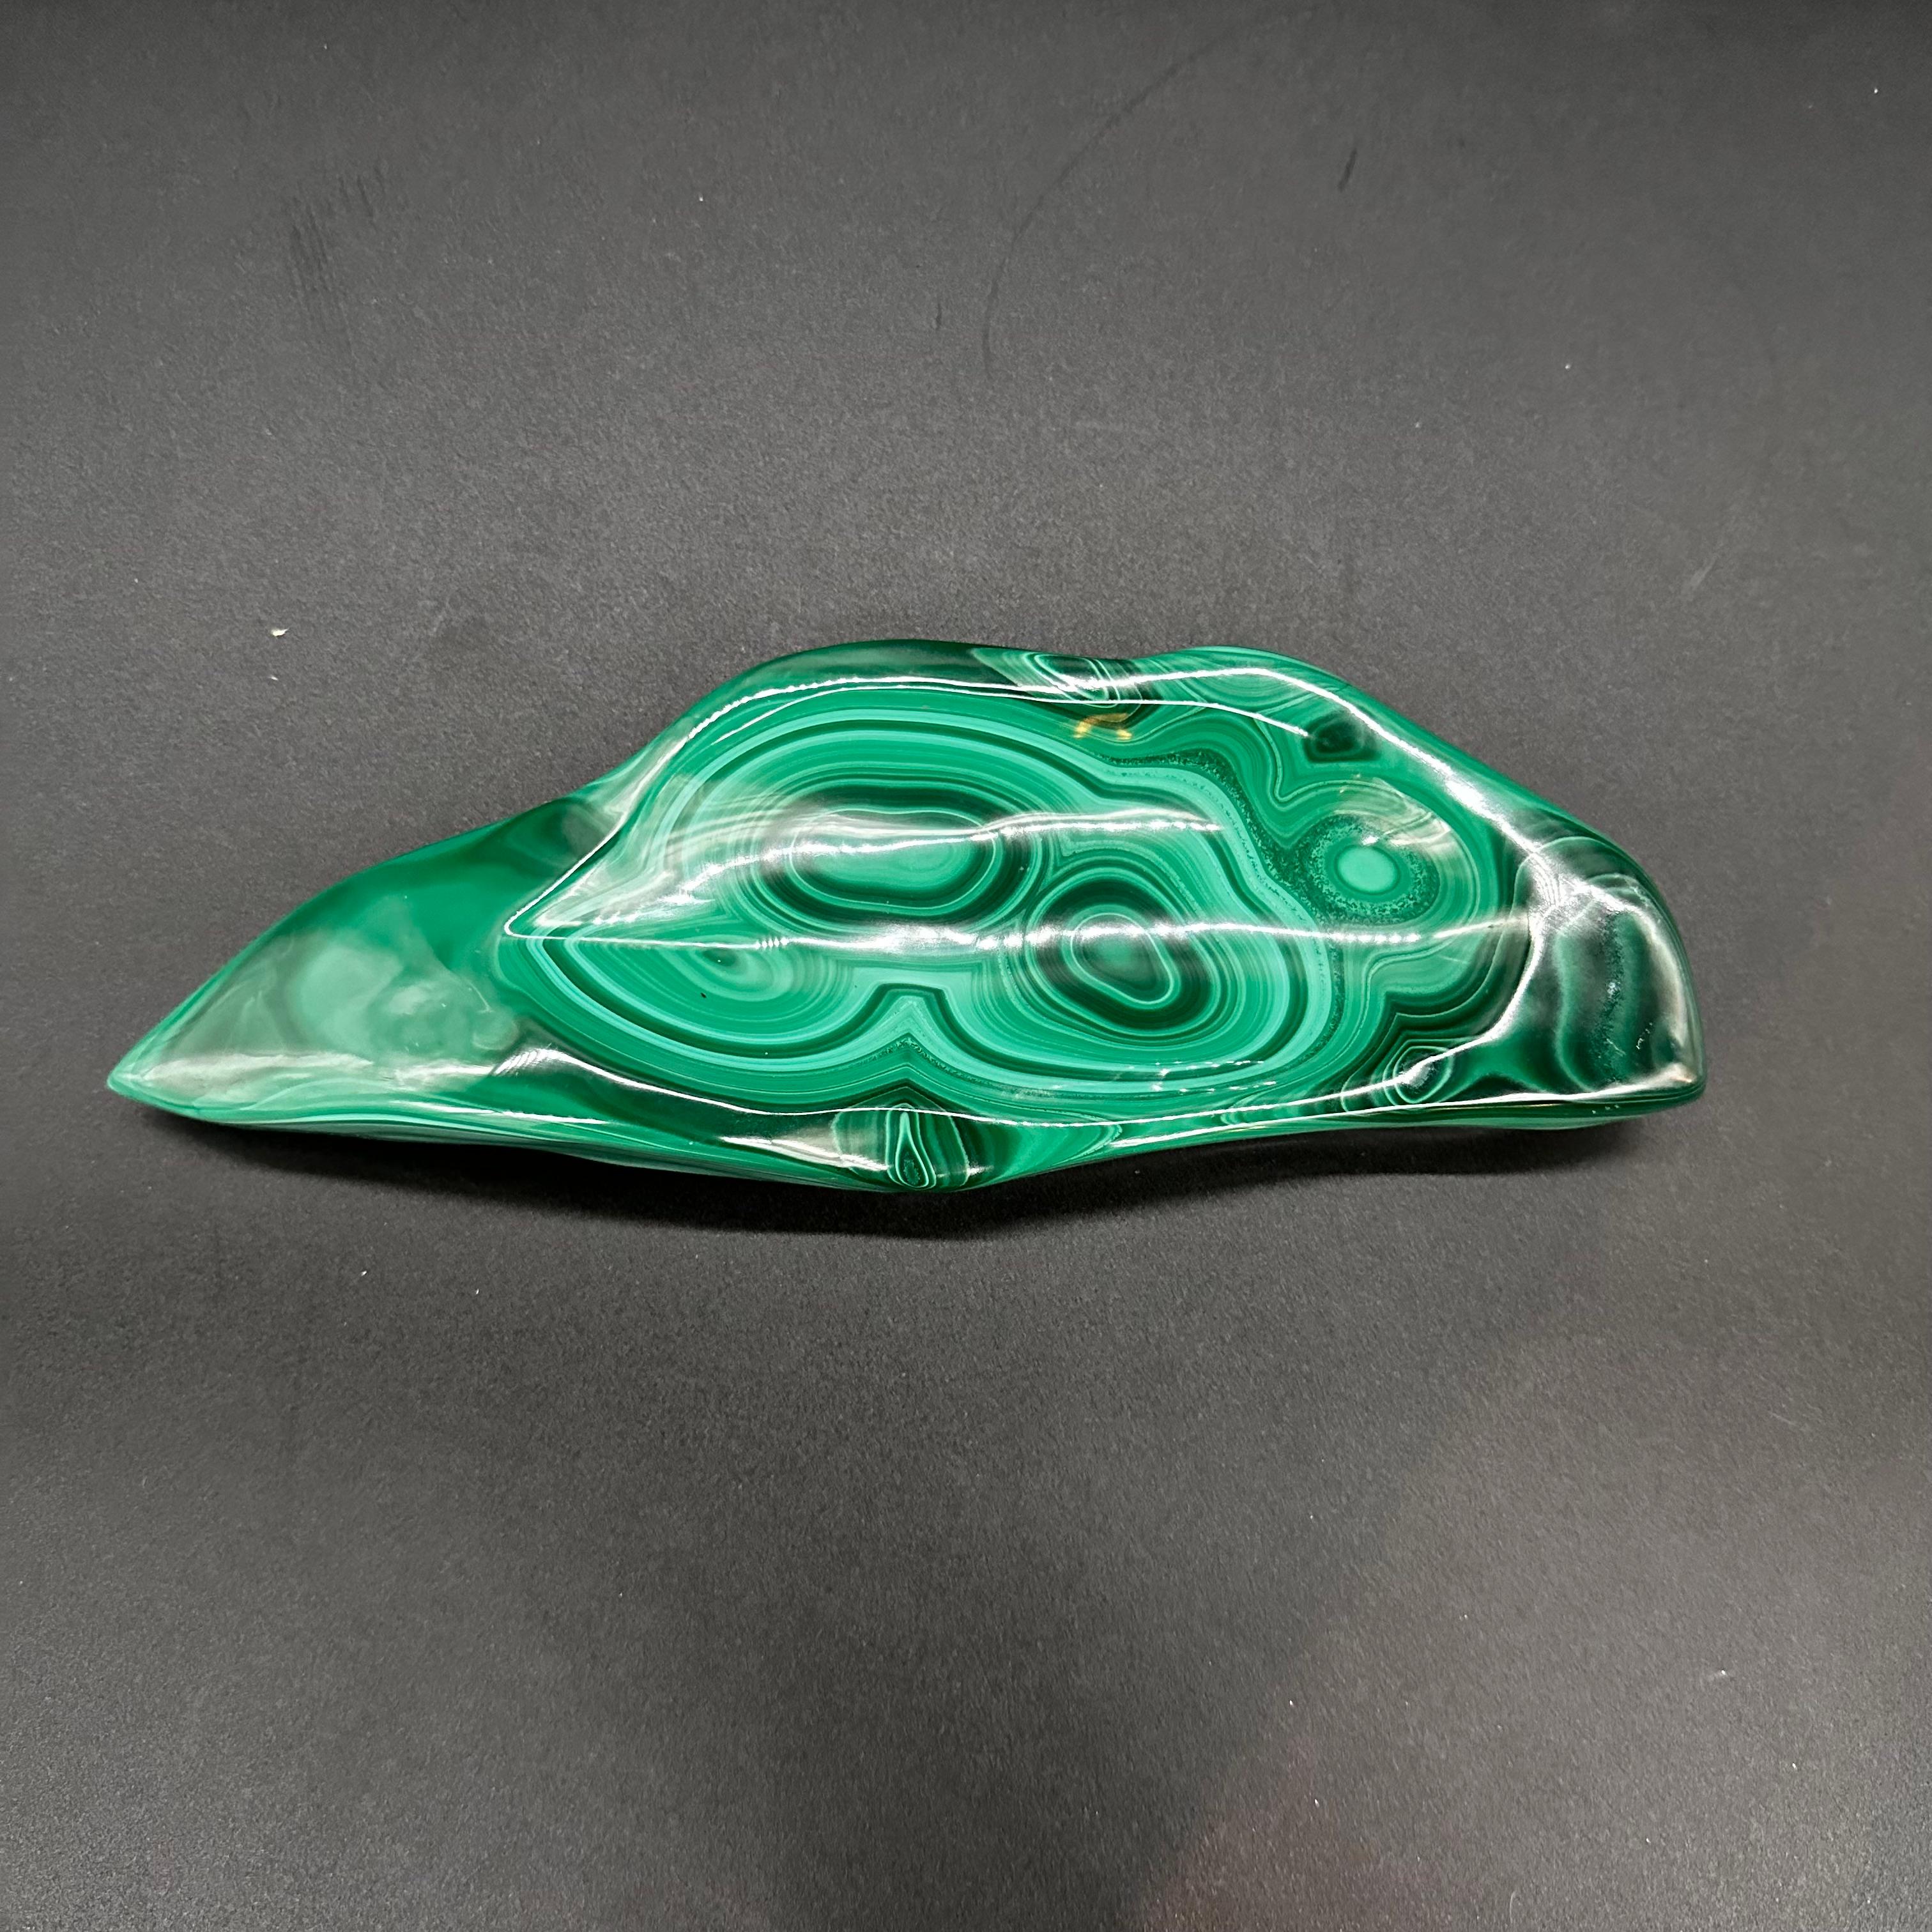 The Vintage Italian Malachite Ashtray from the 1960s is a stunning example of mid-century design and craftsmanship. Made from genuine malachite stone, prized for its rich green hues and intricate patterns, this ashtray exudes luxury and